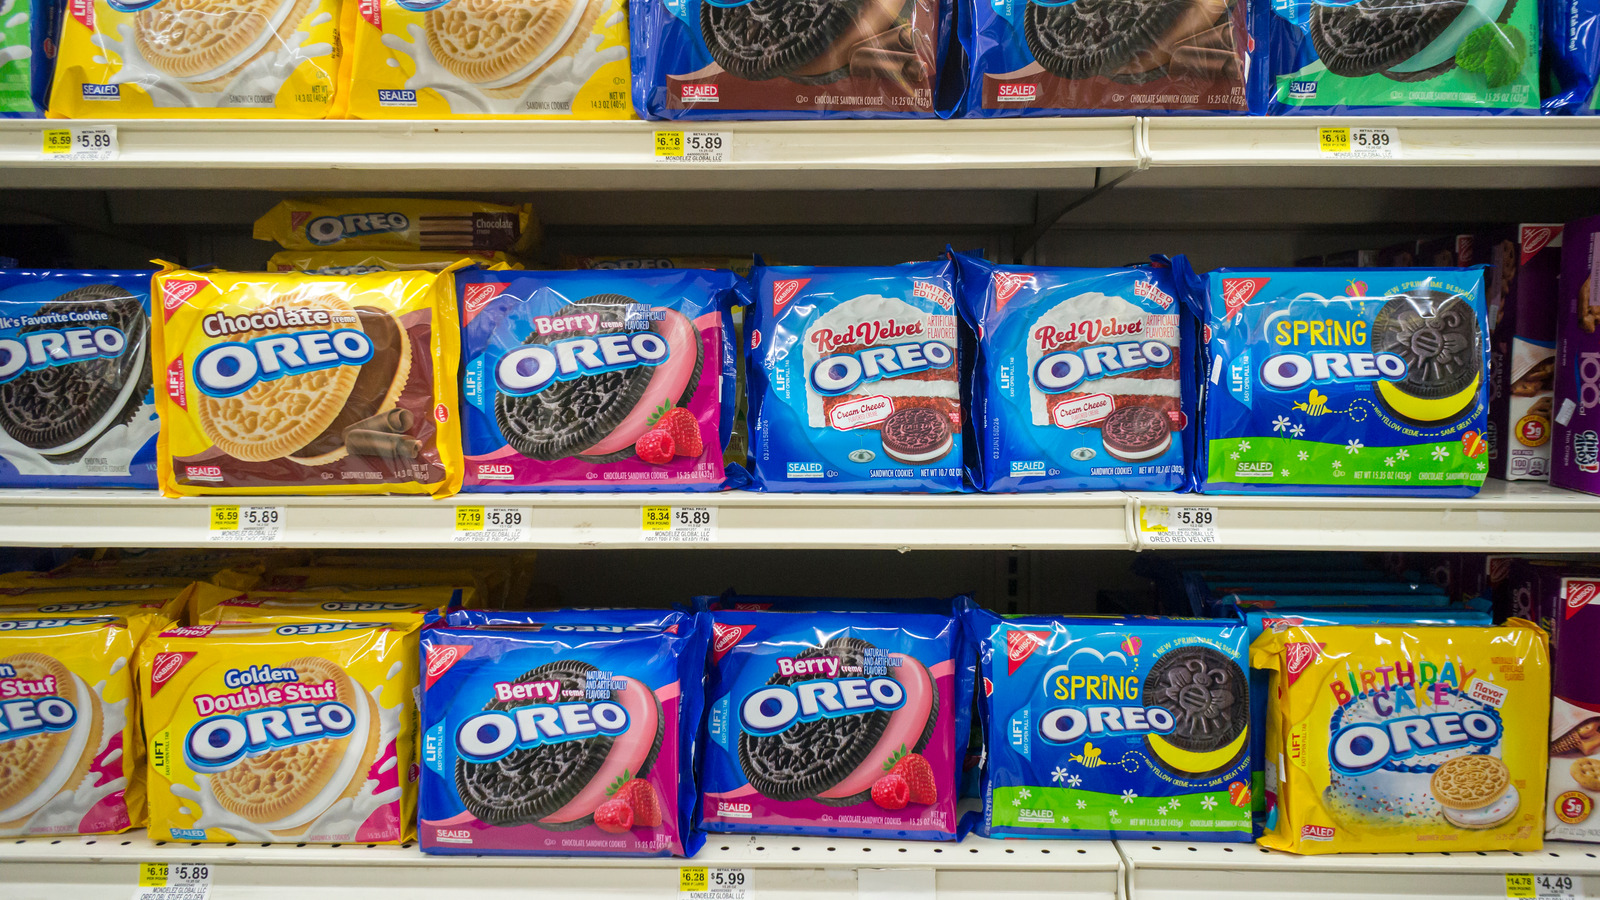 Chips Ahoy! confirms it has discontinued popular cookie flavor and